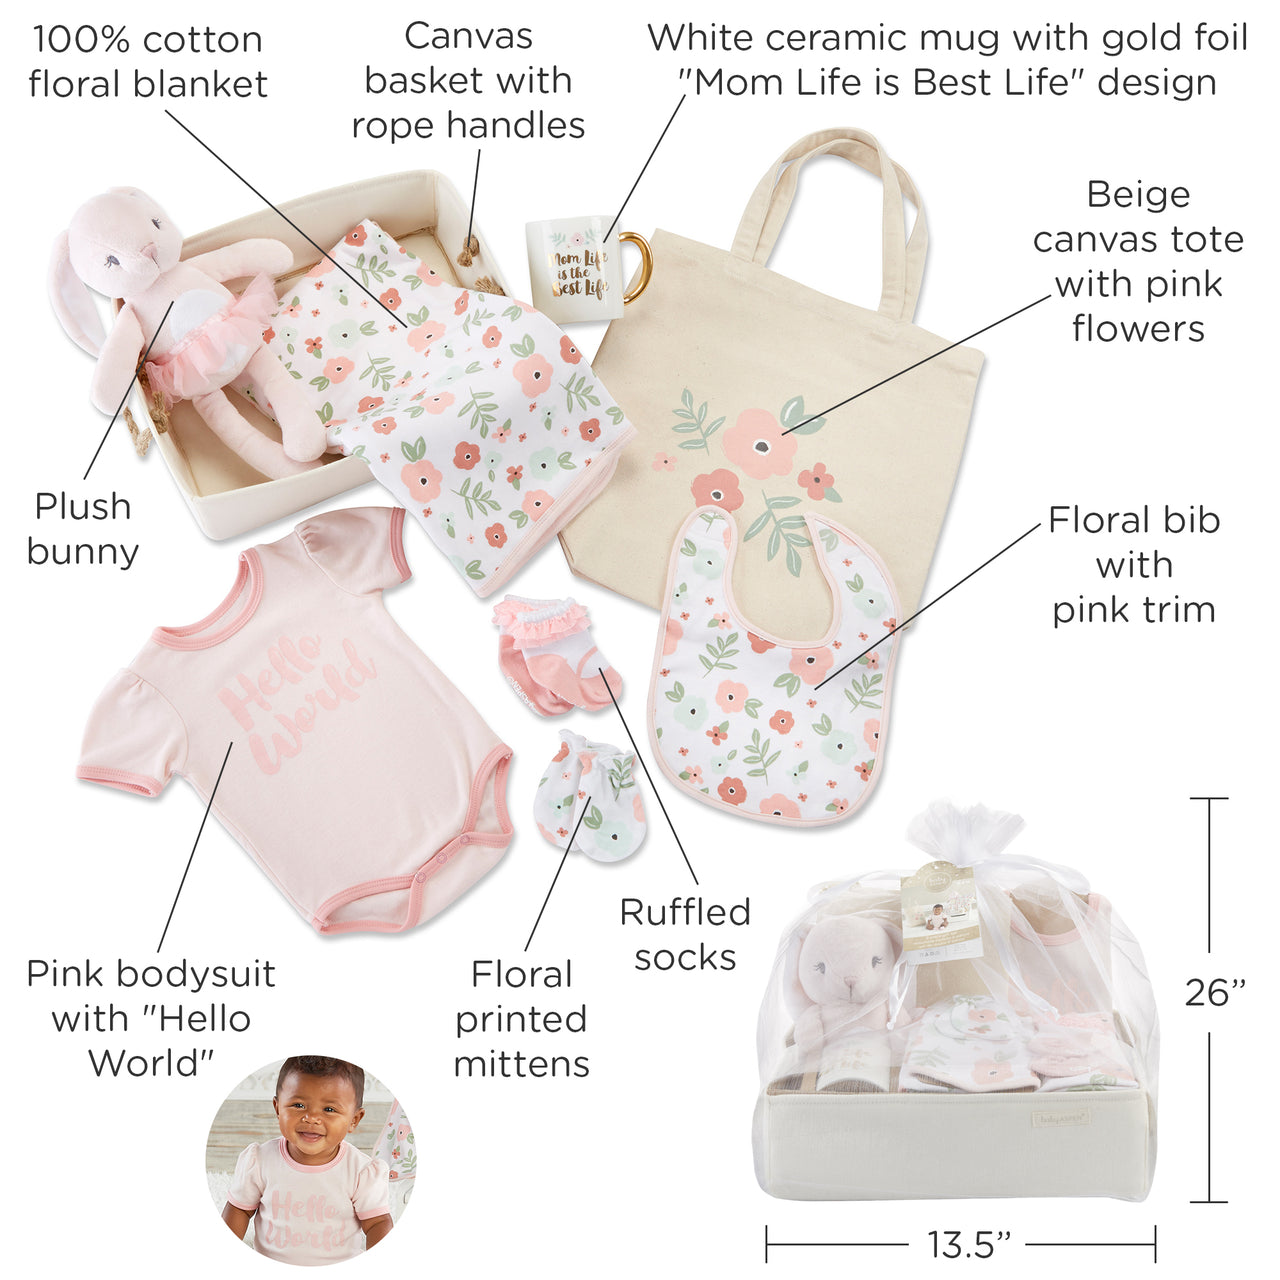 Fancy Floral 9-Piece Baby Gift Basket (Personalization Available)